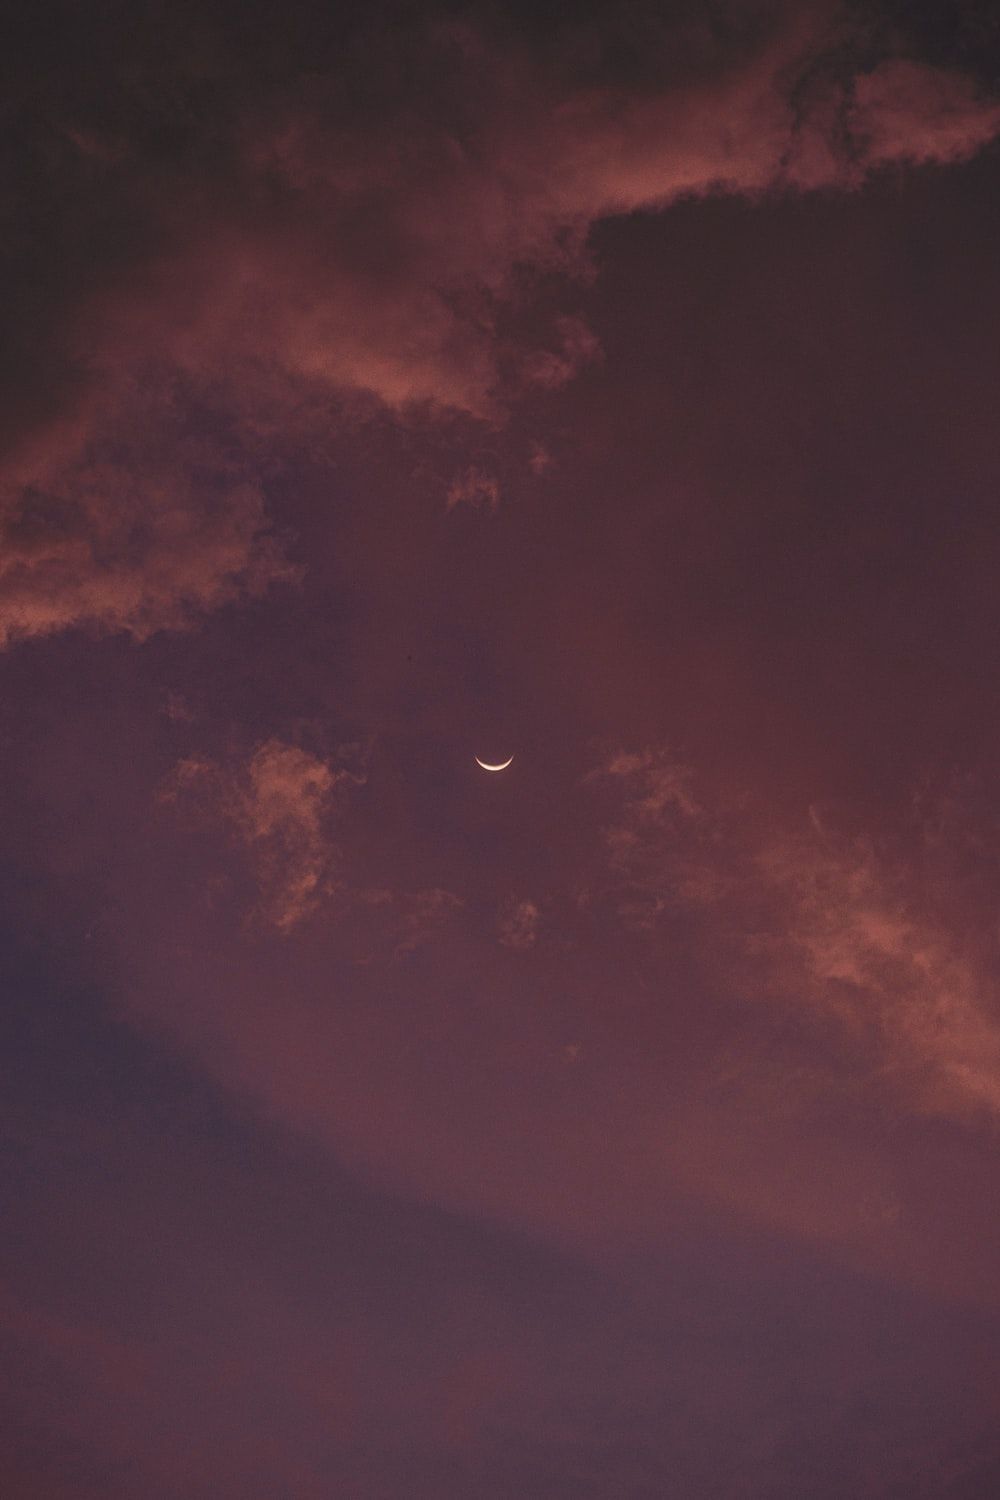 A crescent moon peeks through the clouds during a purple sunset. - HD